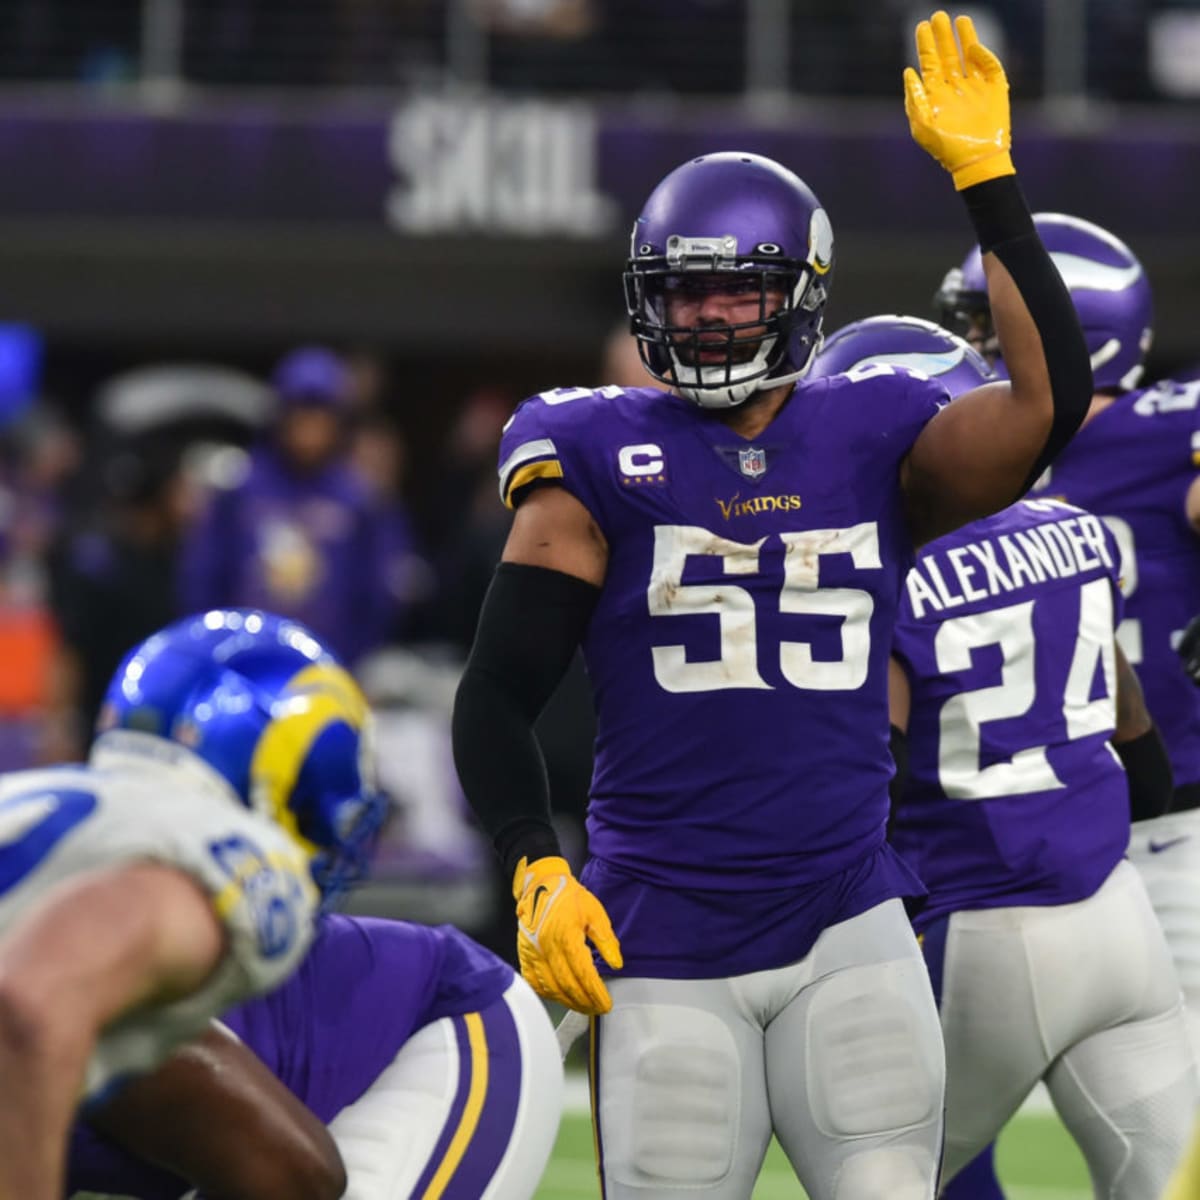 Minnesota Vikings' Anthony Barr out for season with torn pec